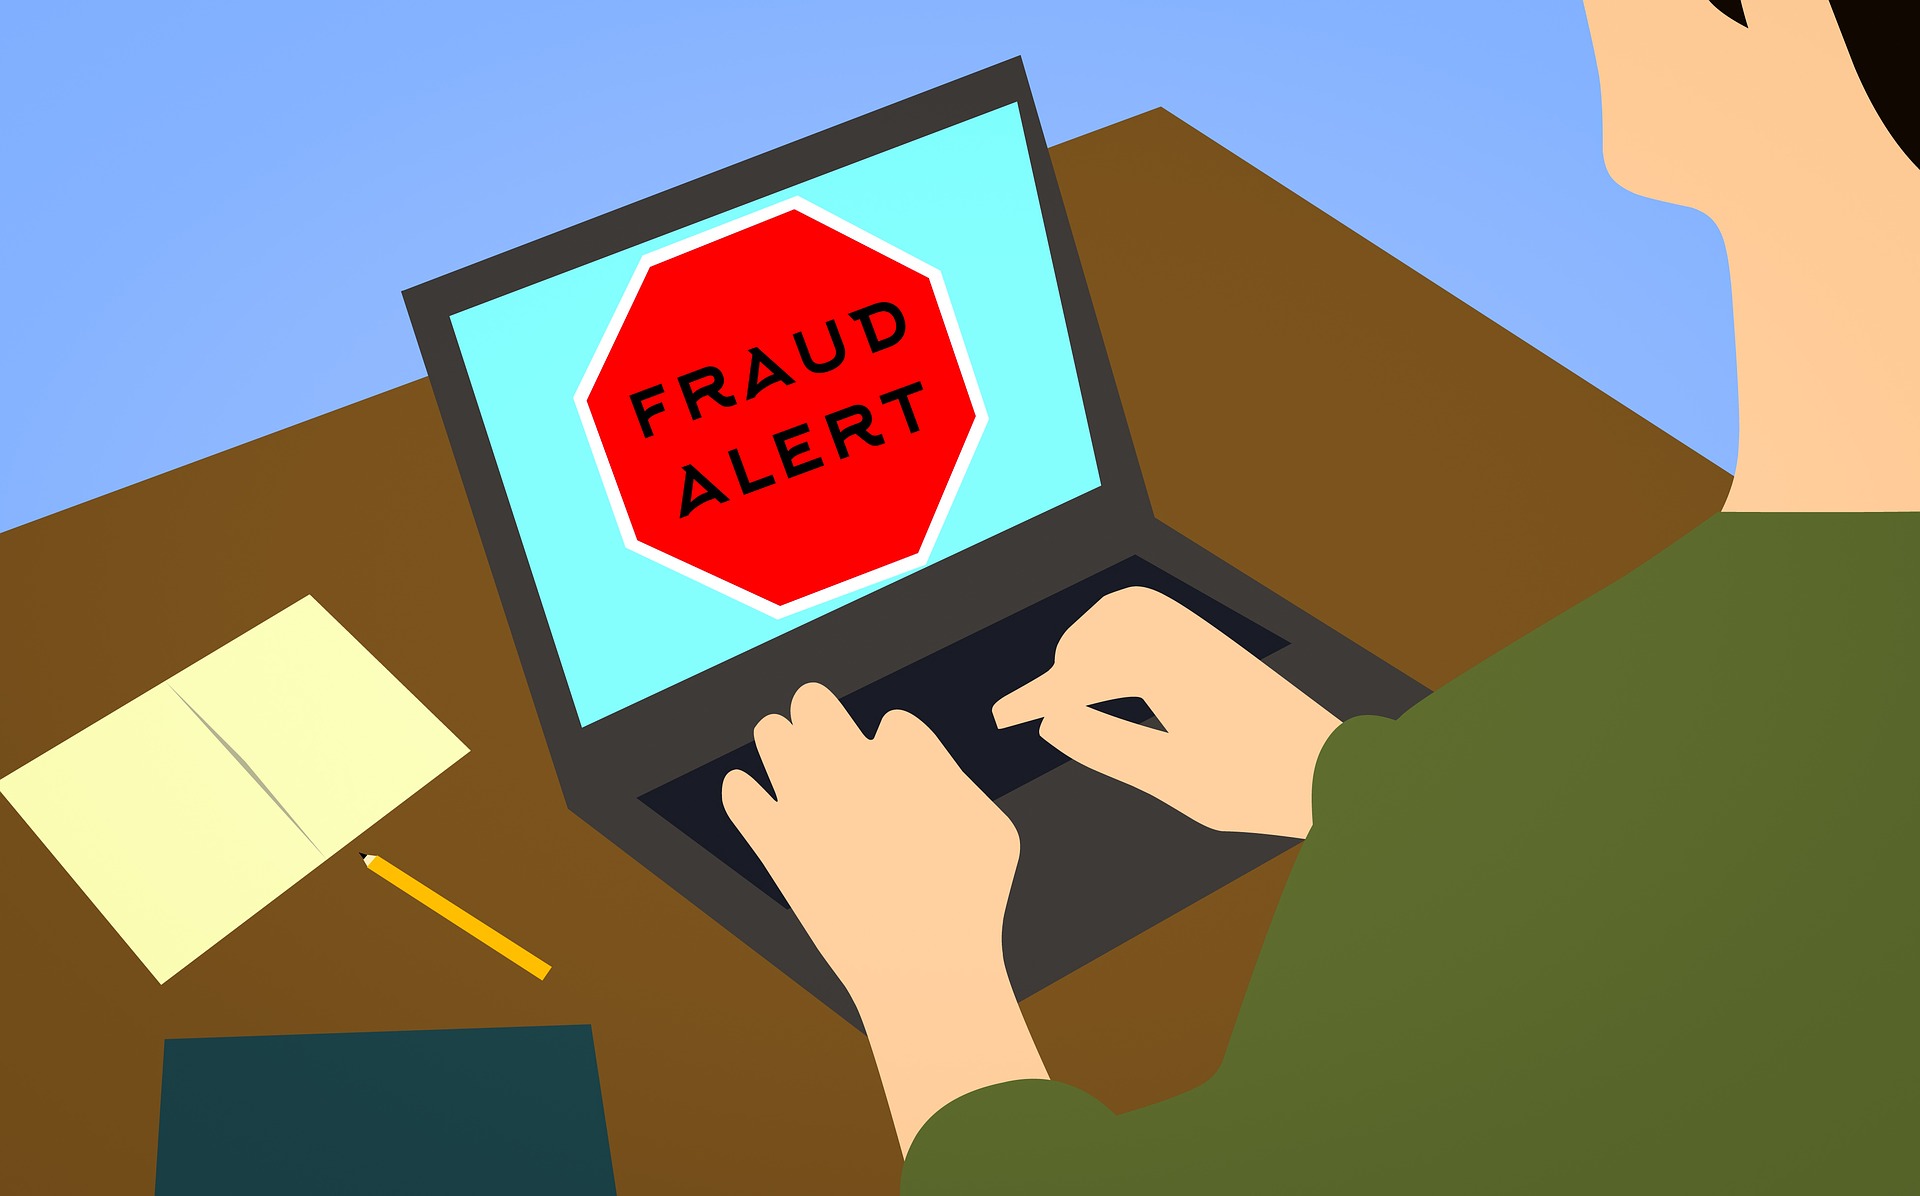 A cartoon image of a man sitting in front of a laptop, which displays a large, red fraud alert warning sign